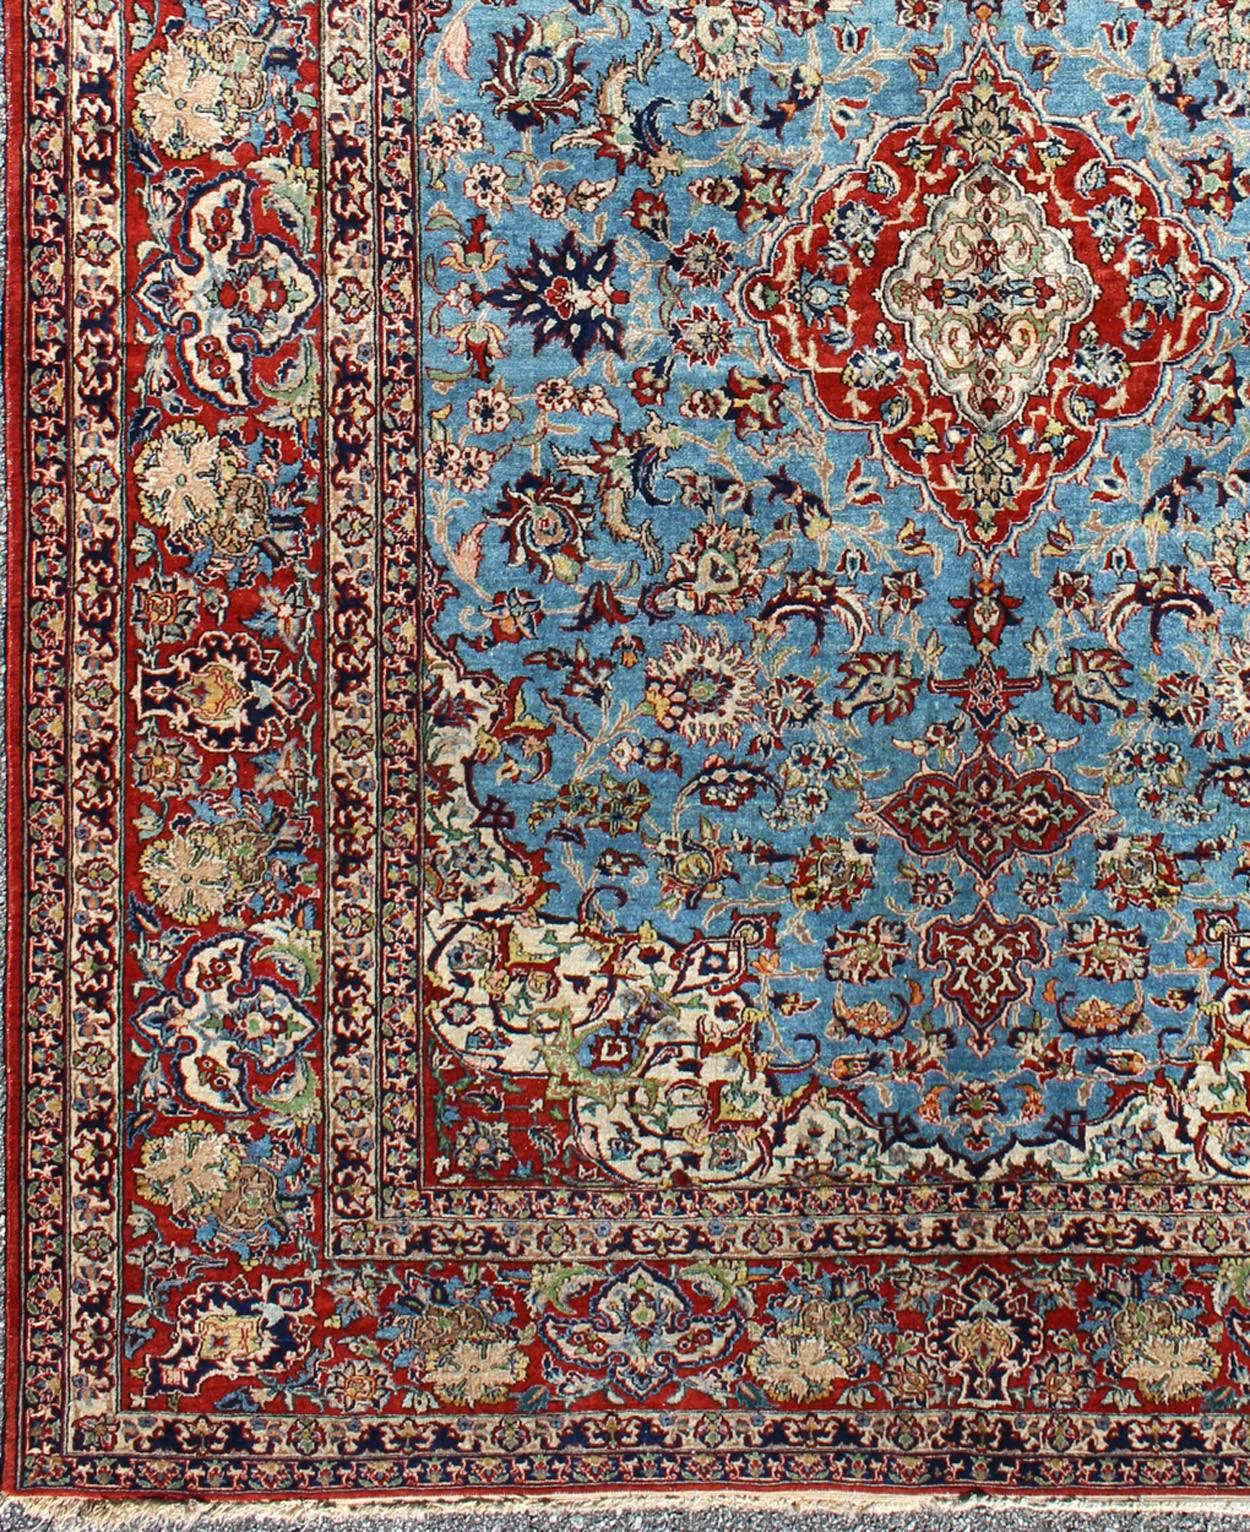 This outstanding Persian Isfahan carpet is primarily characterized by its classical composition. This beautiful carpet represents the highest levels of mastery achieved by Persian weavers. It showcases floral elements and vine scrolls that are